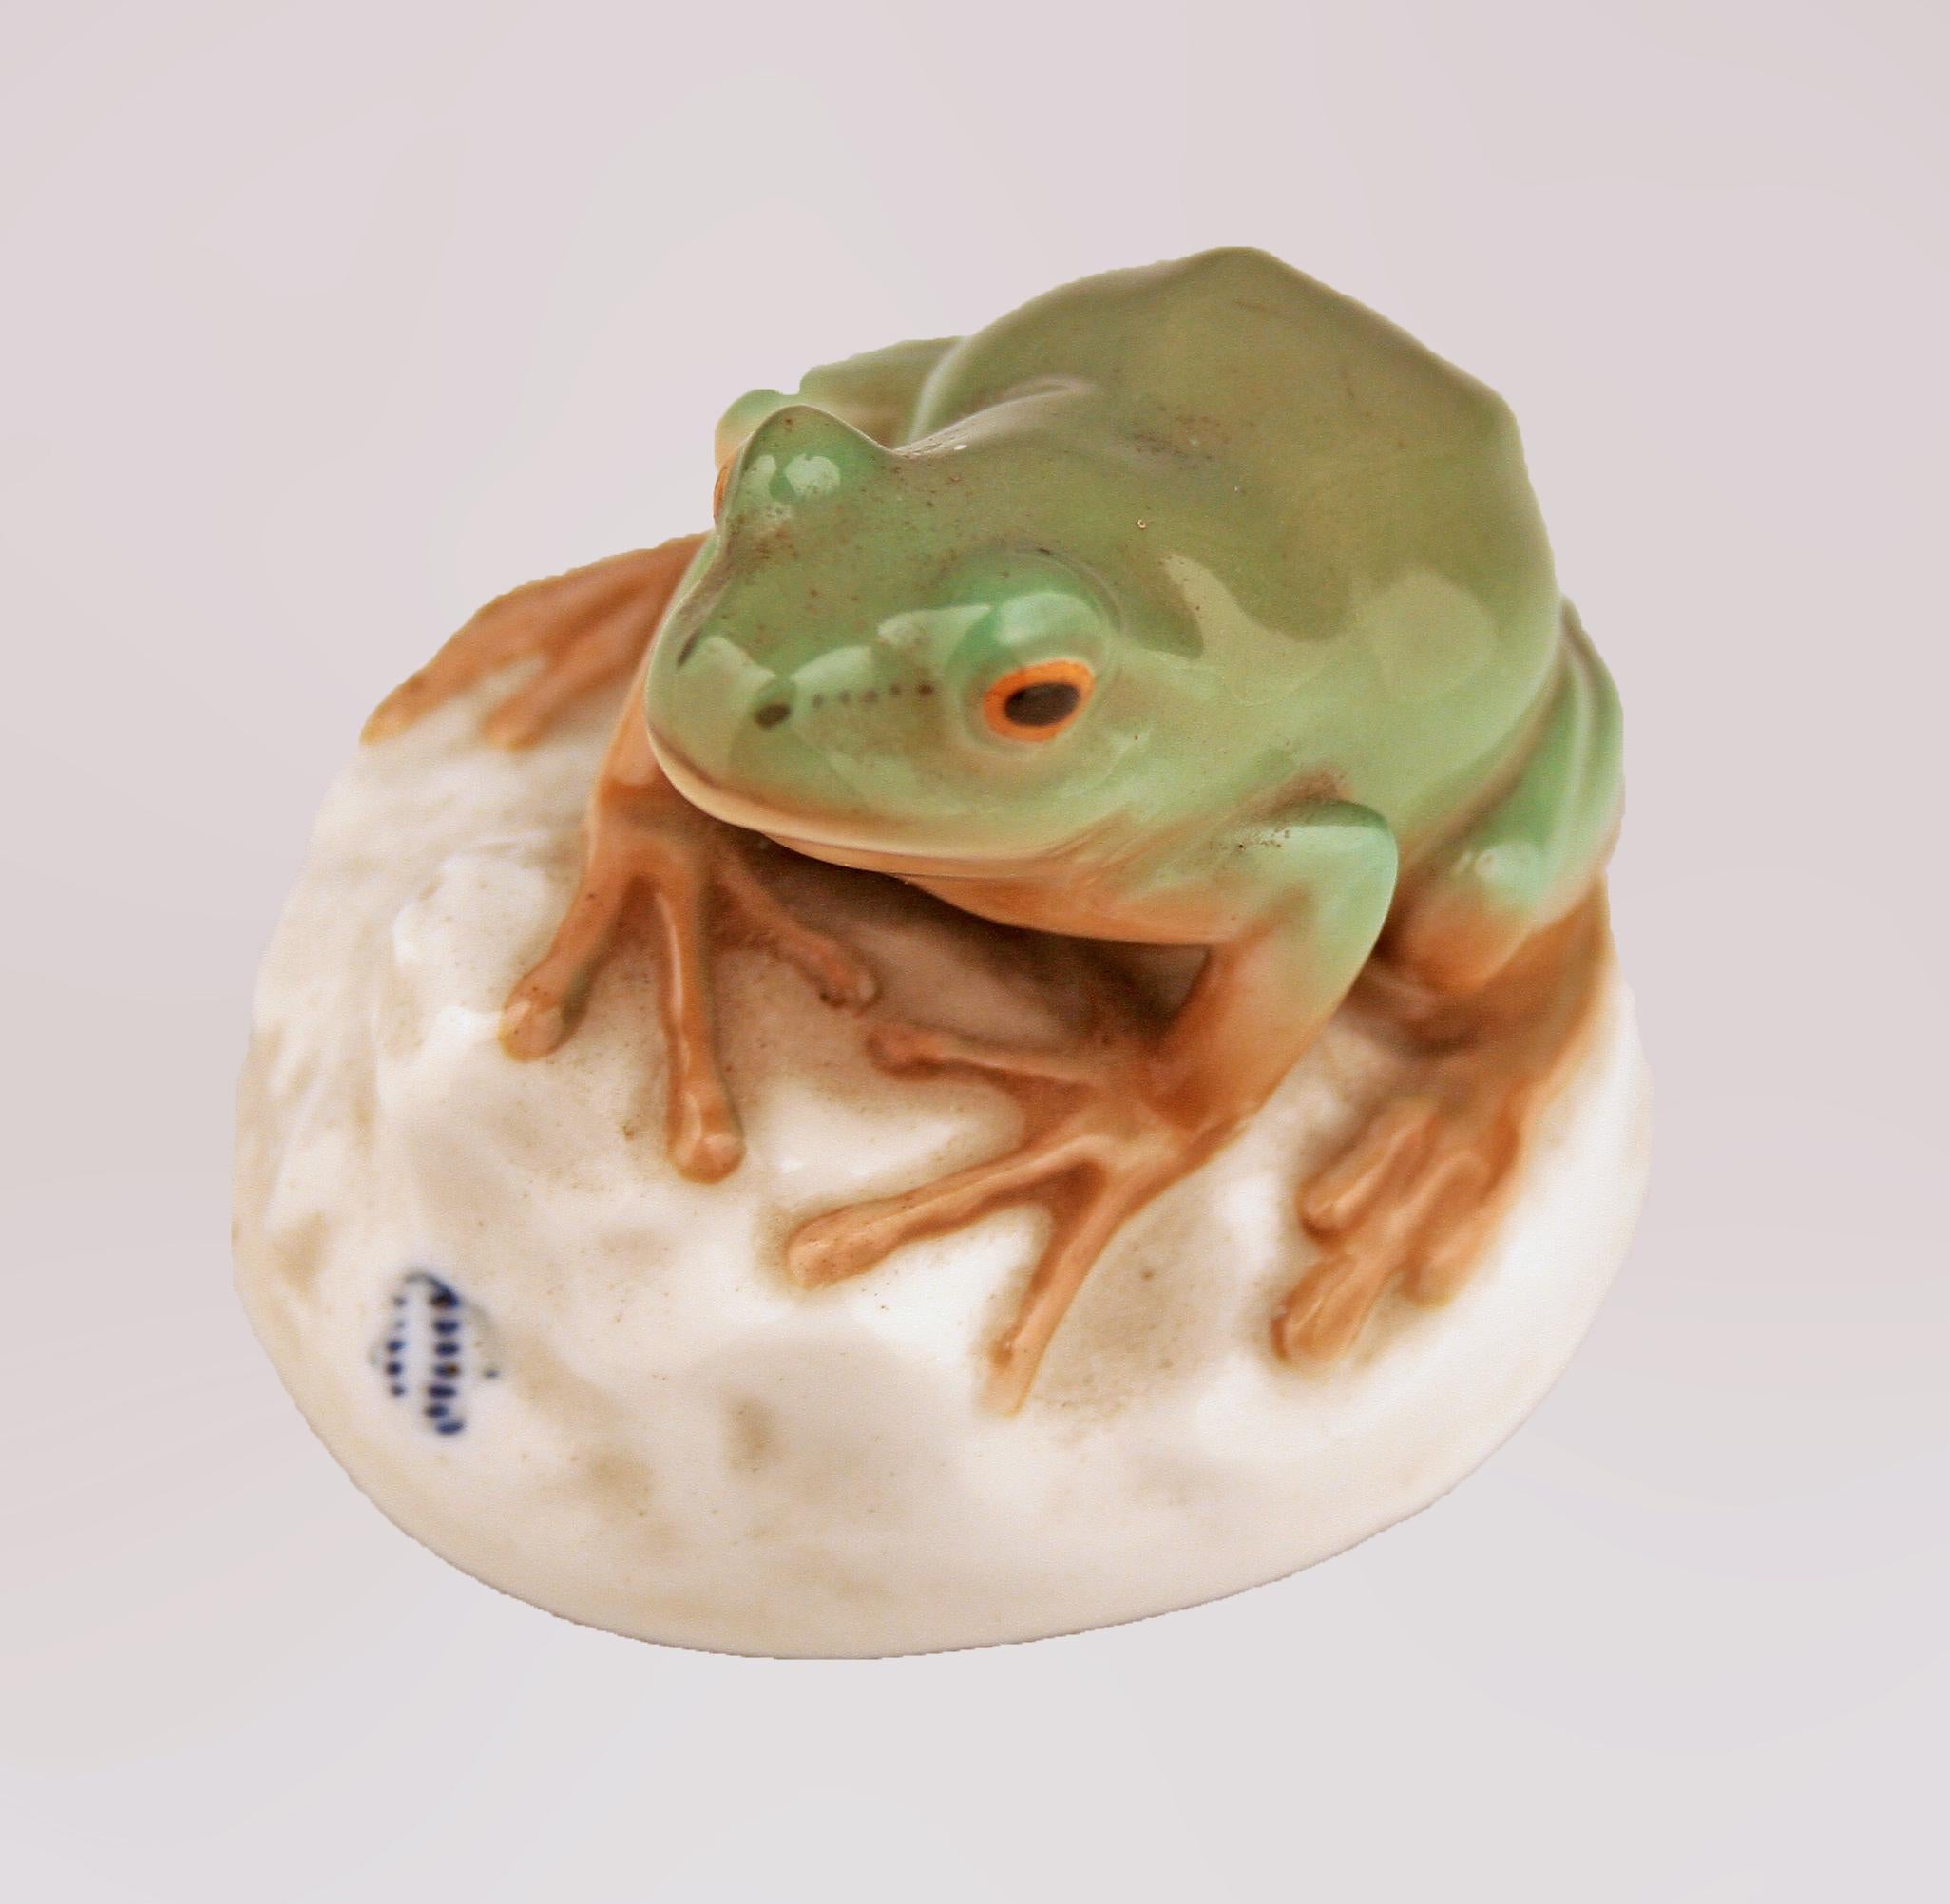 Mid-20th Century Modern German Glazed and Painted Porcelain Frog by Nymphenburg In Good Condition For Sale In North Miami, FL